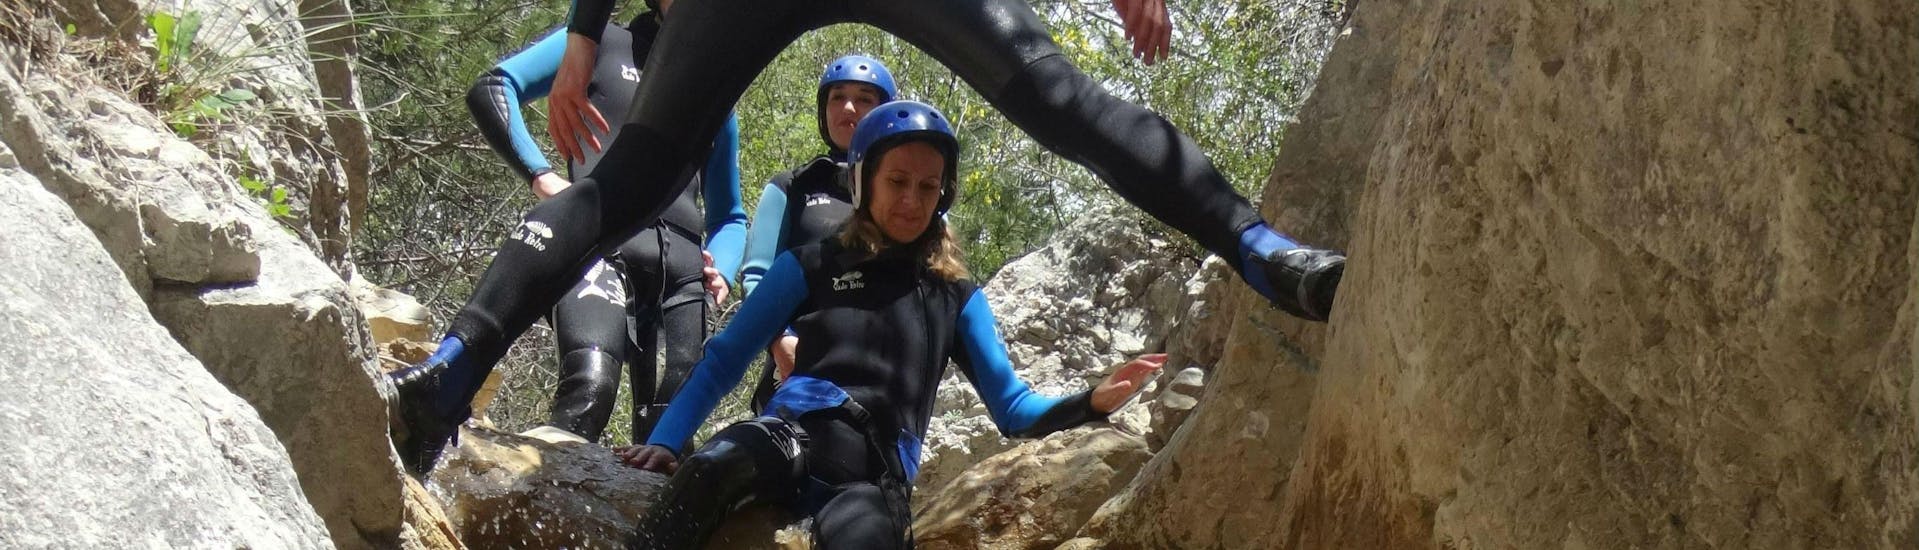 canyoning-for-families-rayaup-raft-session-hero